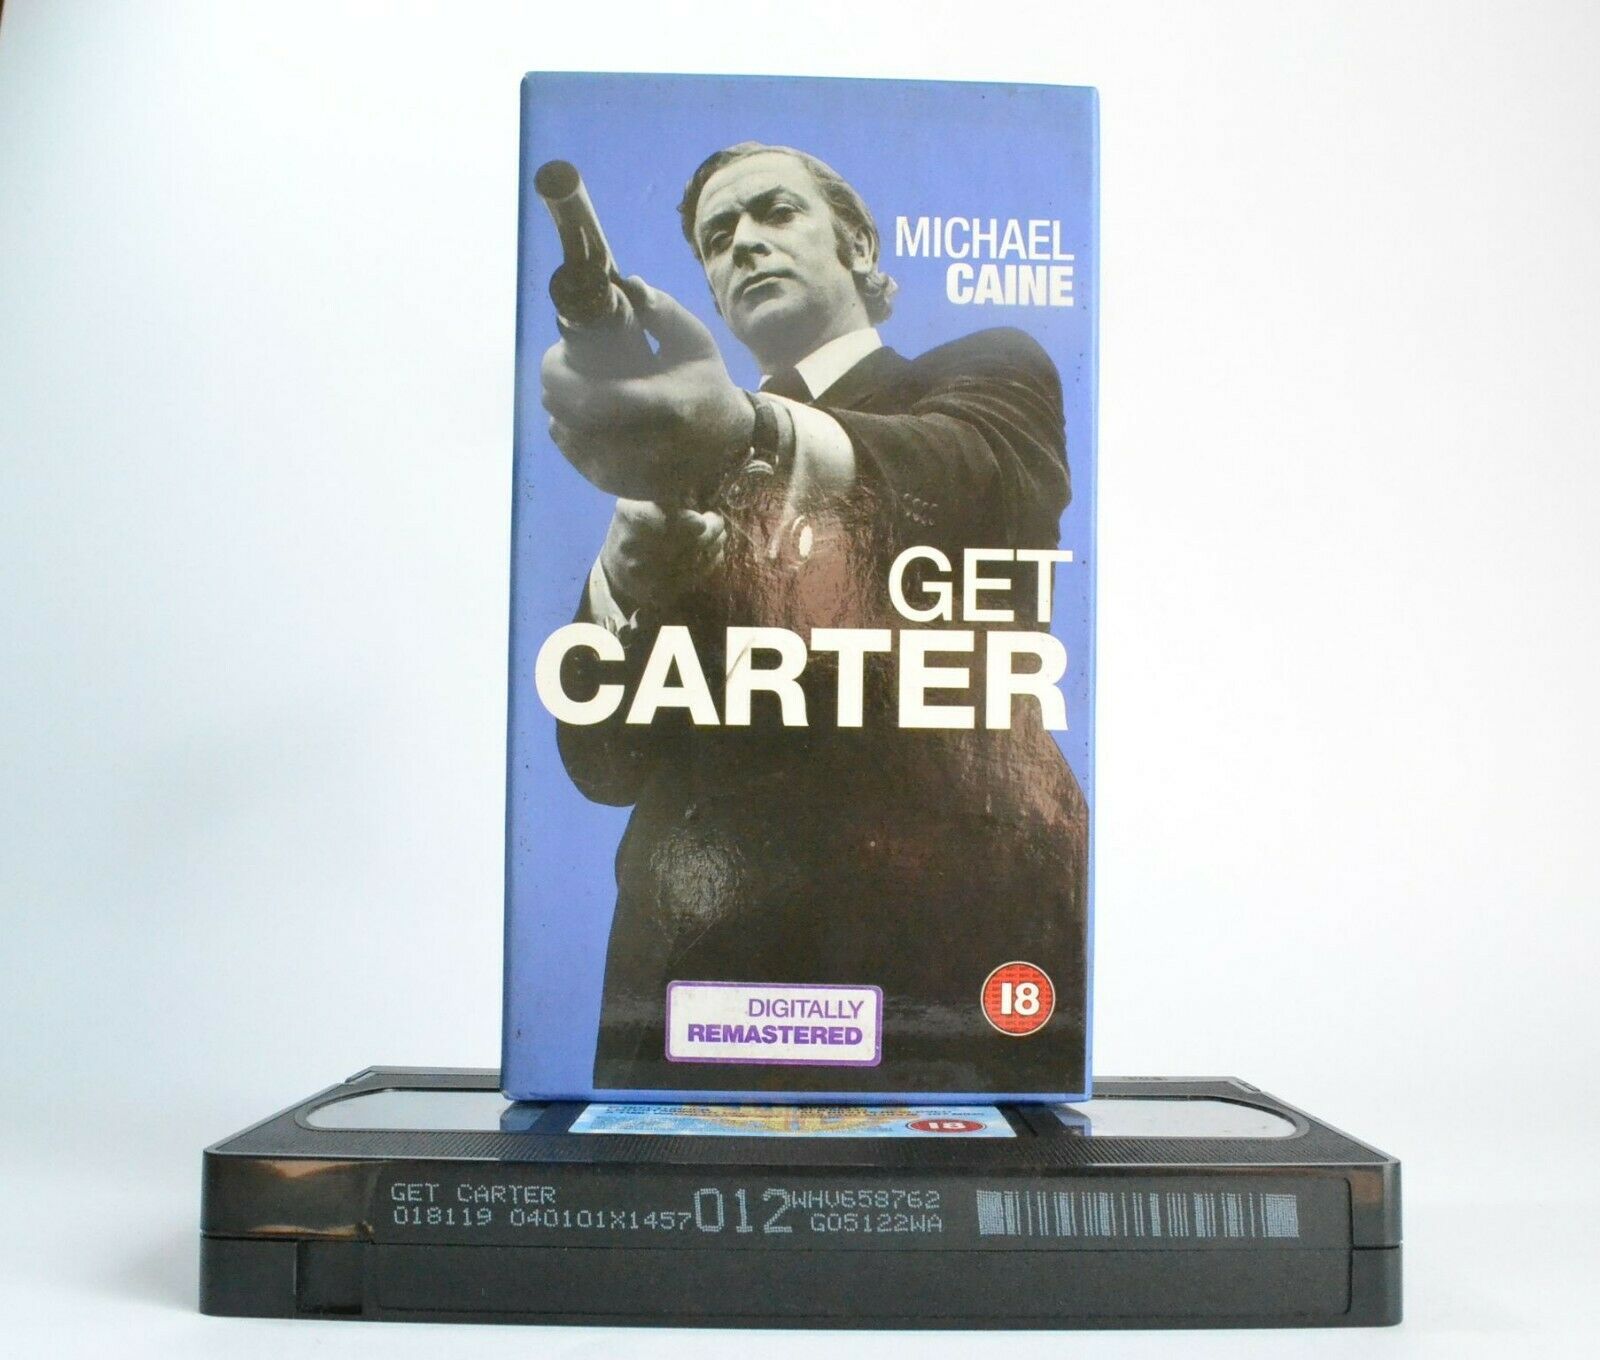 Get Carter (1971): Digitally Remastered - Crime Action - Michael Caine - Pal VHS-